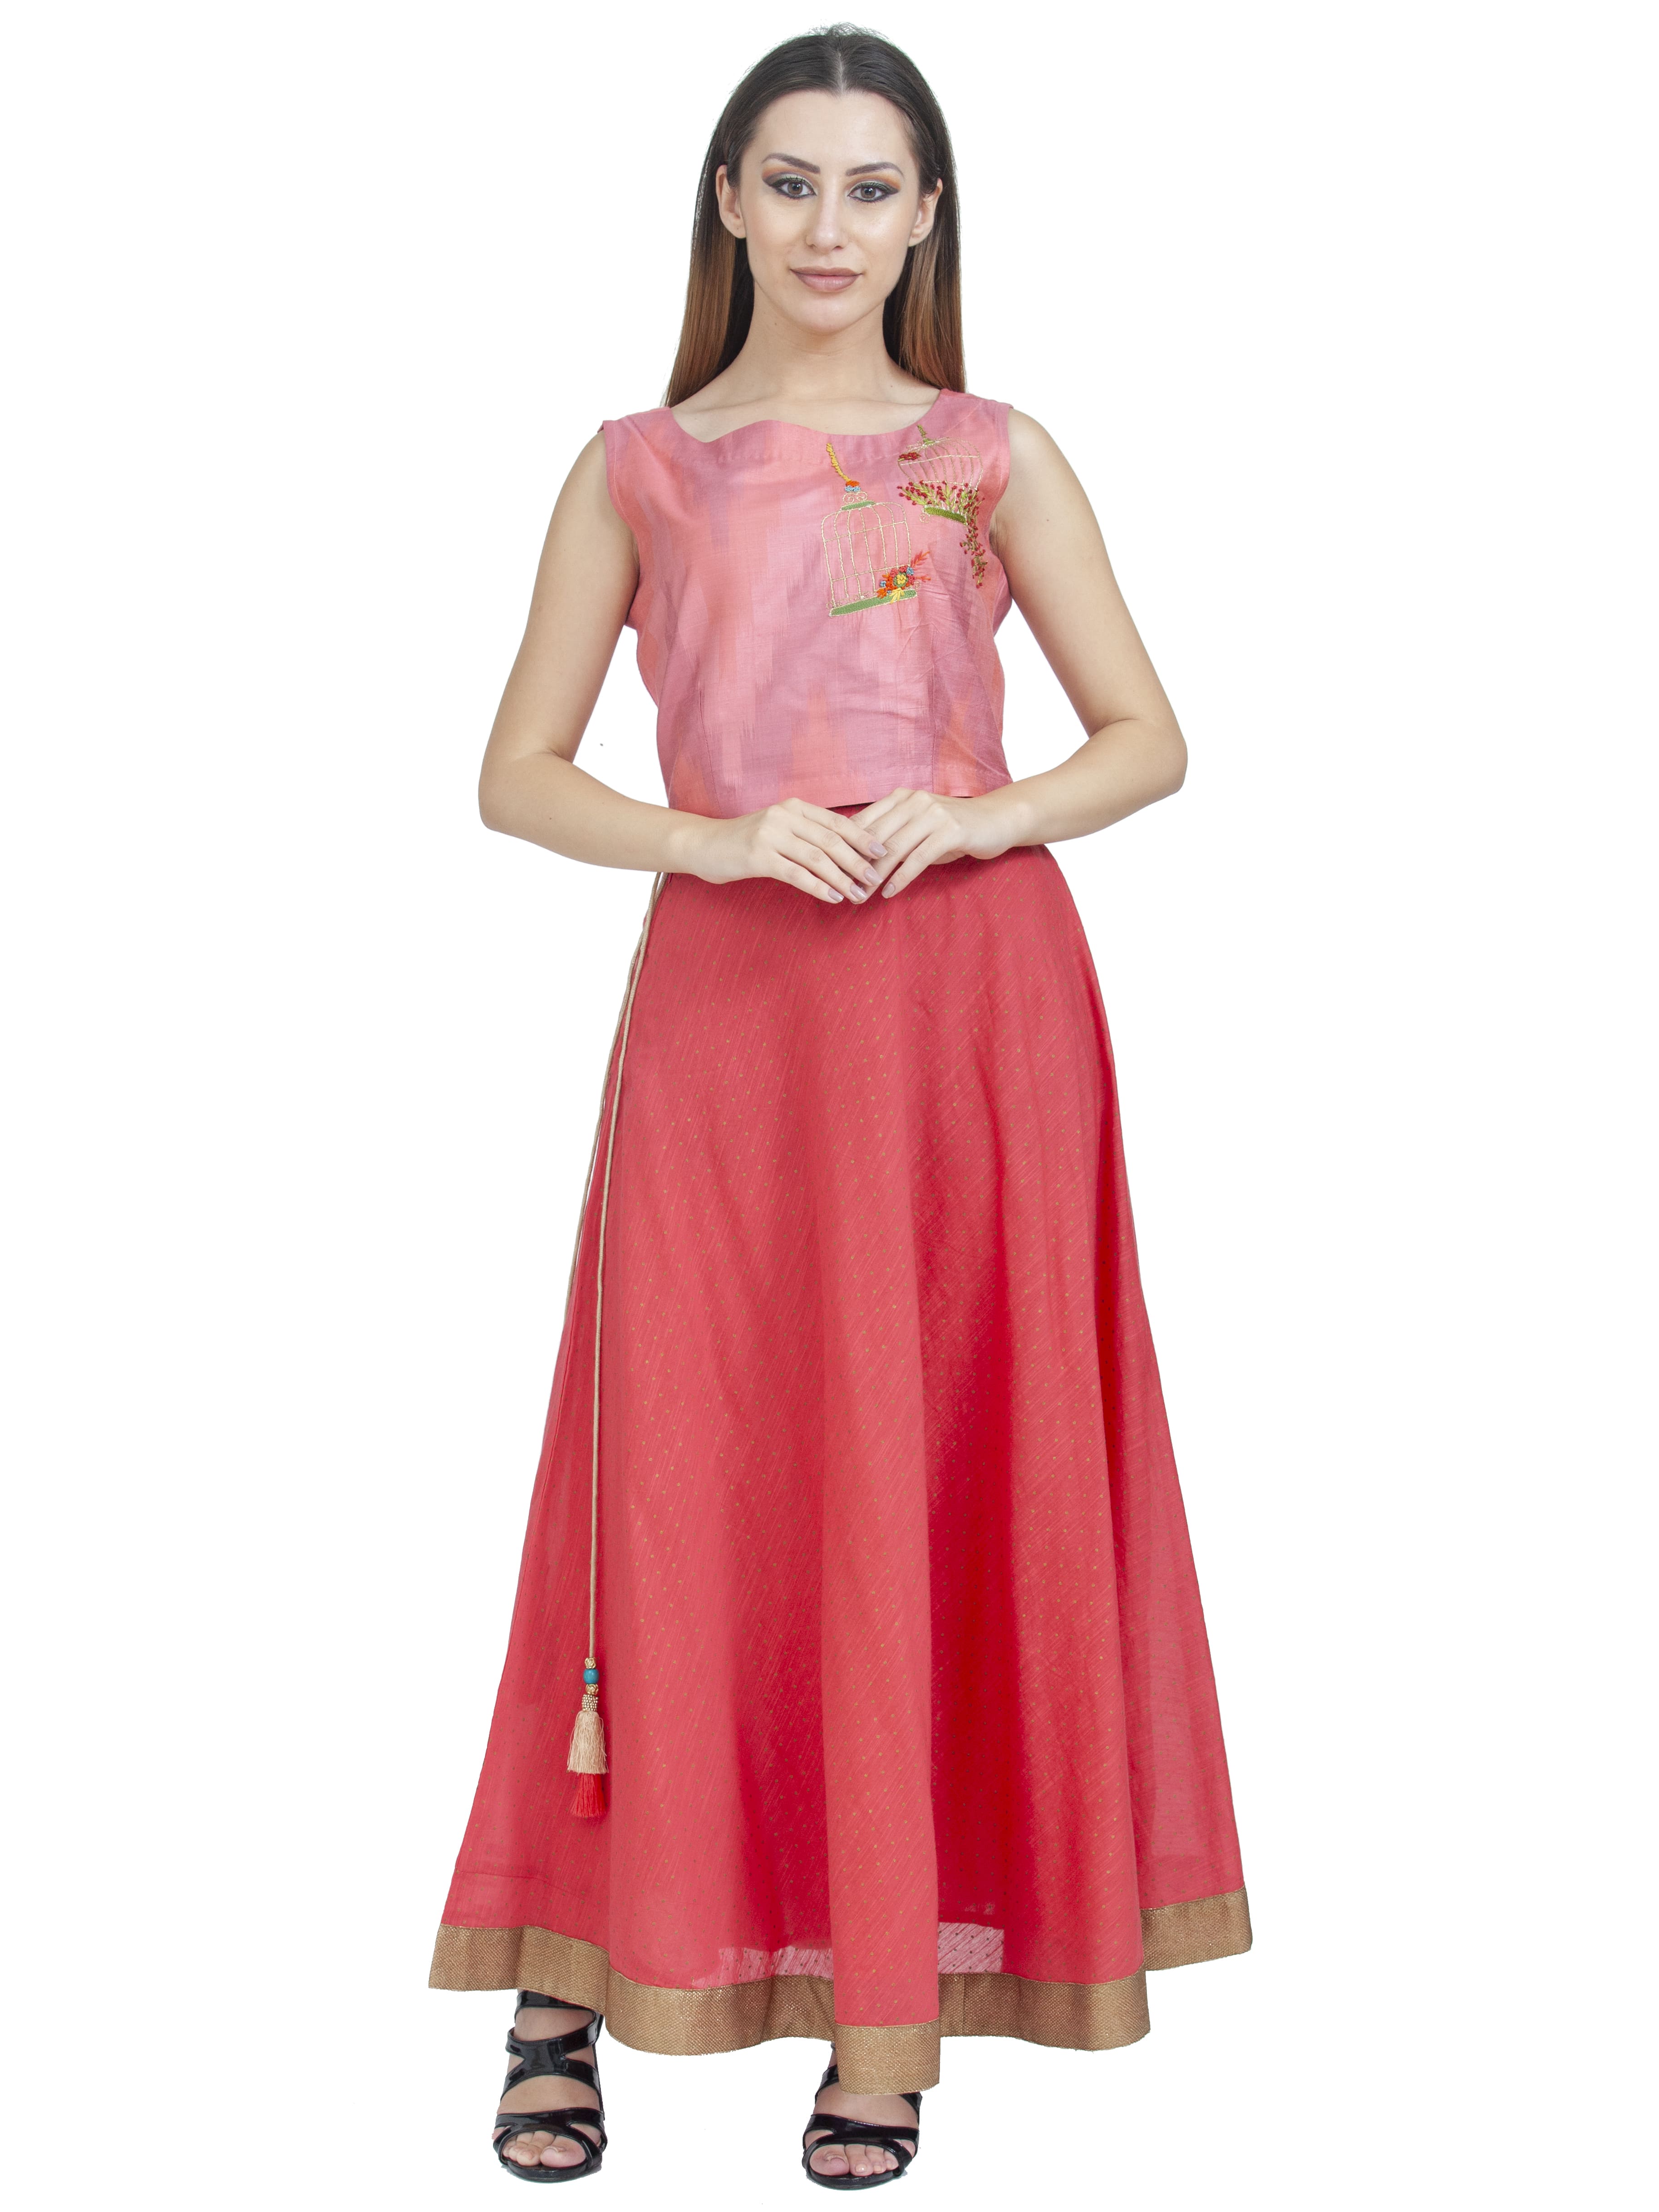 B2b Clothing Wholesale Suppliers India